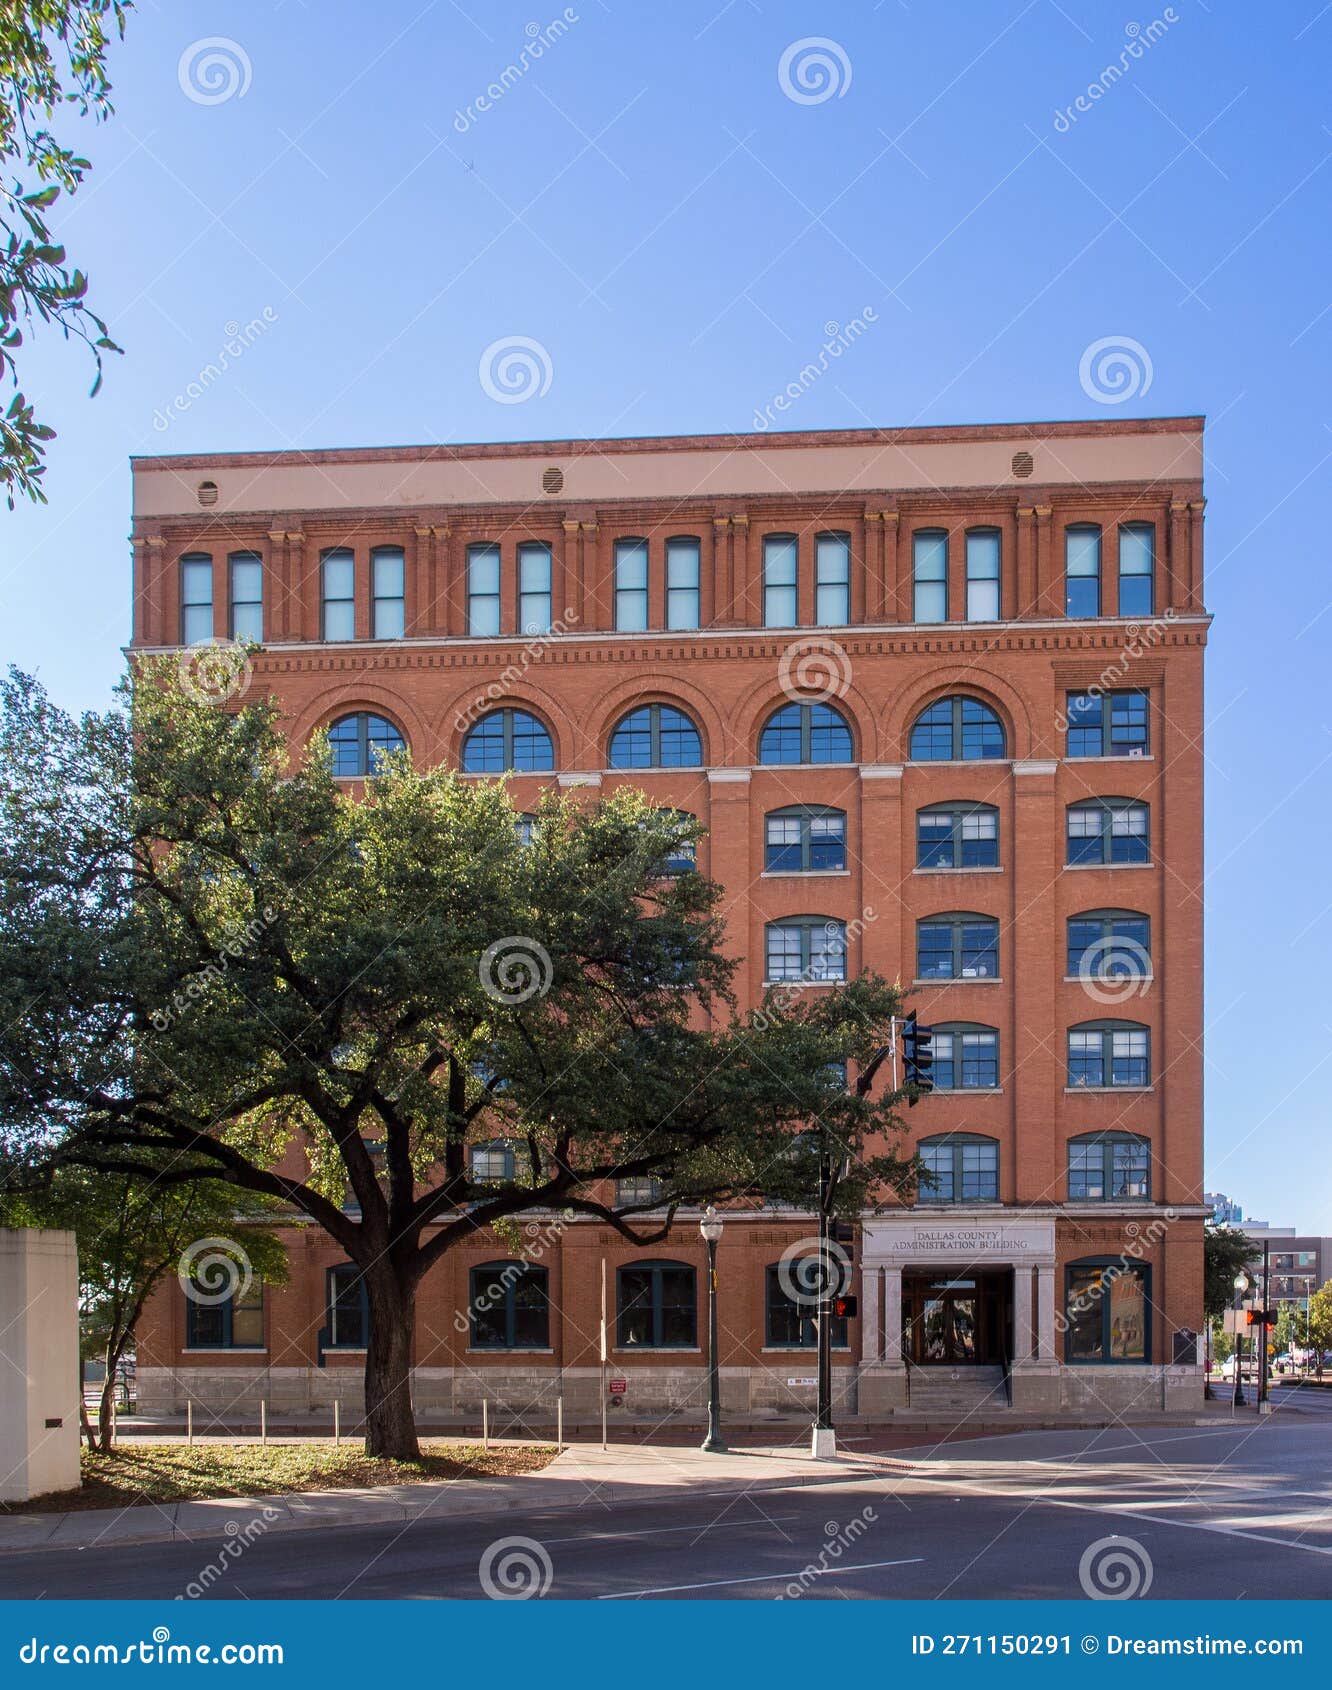 the texas school book depository, now known as the dallas county administration building, the place from which lee harvey oswald